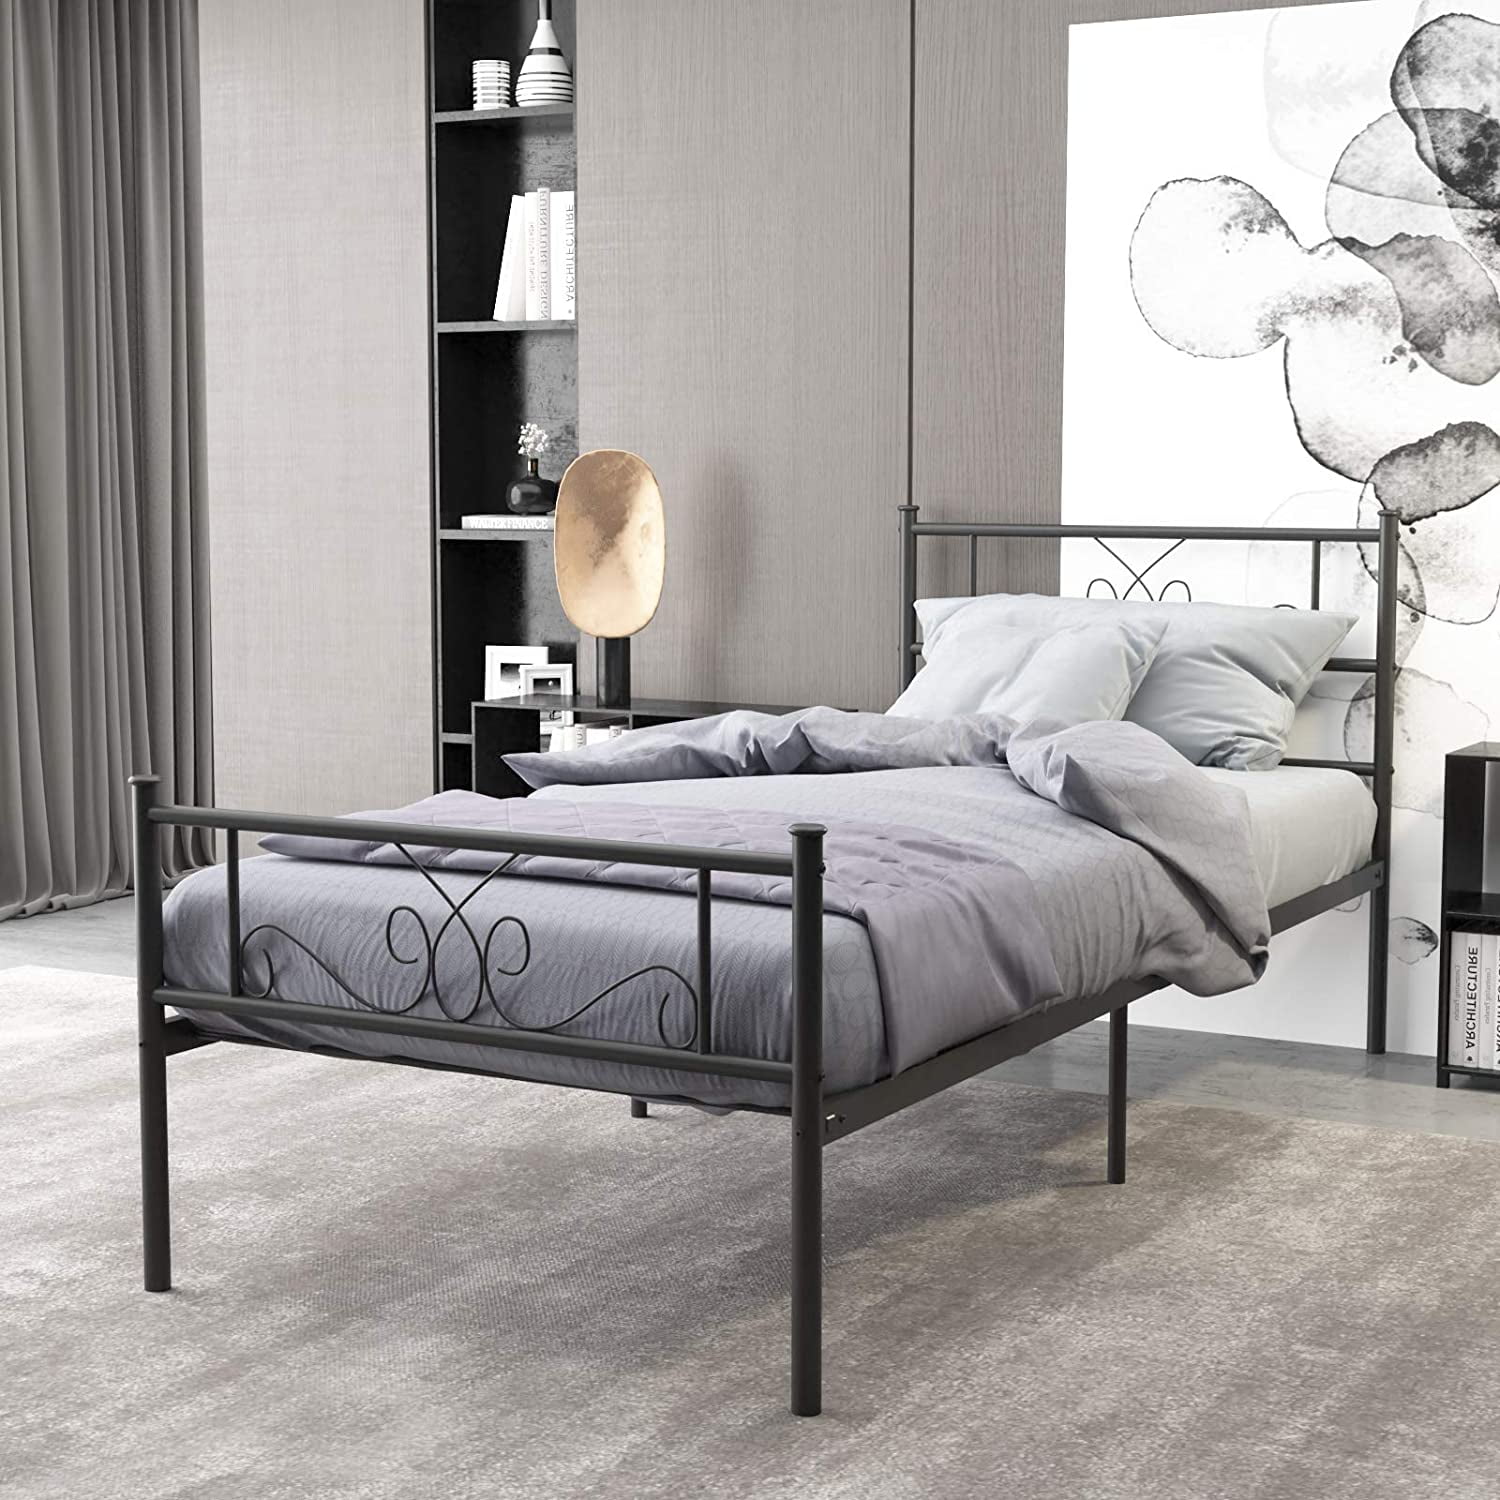 Weehom Twin Size Metal Platform Bed, Are Bed Frames Really Necessary